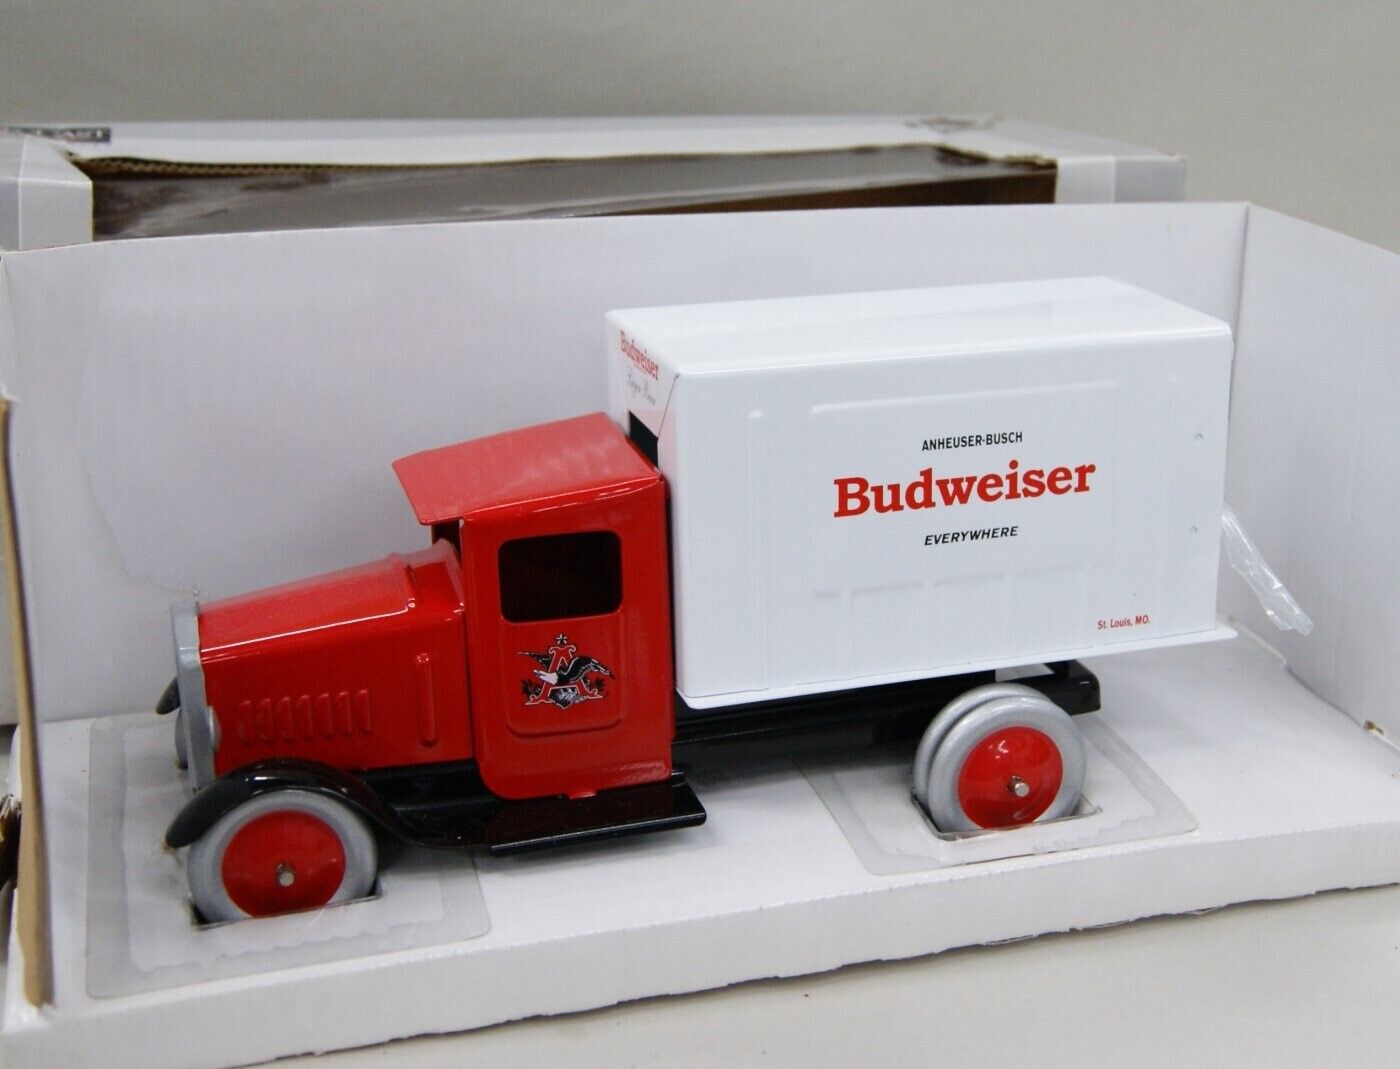 Spec Cast Steel Replica Limited Edition Budweiser Beer Delivery Truck, L-4773